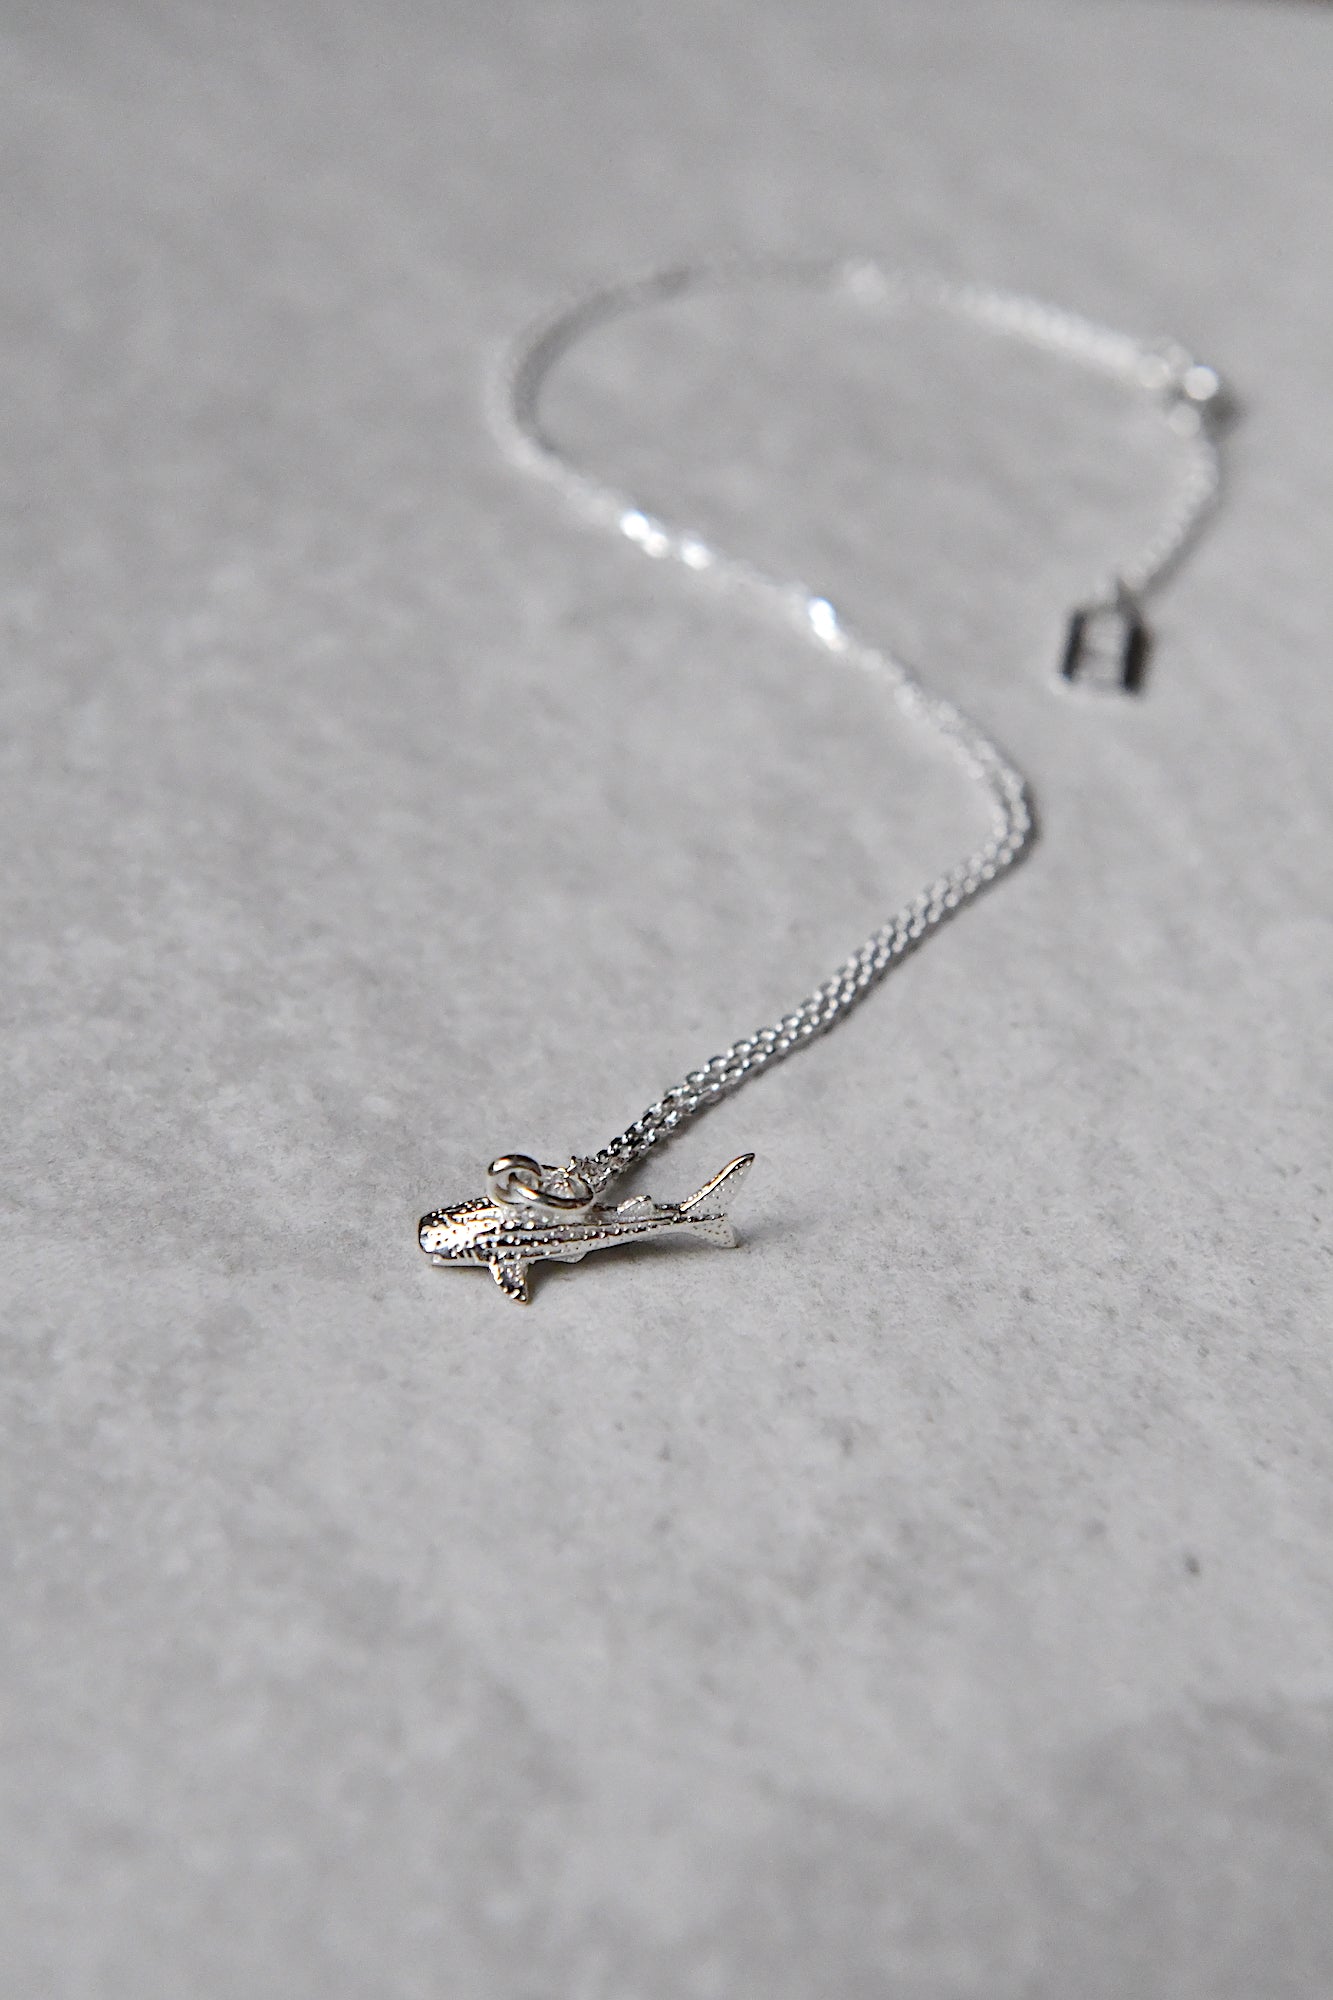 Whale shark necklace